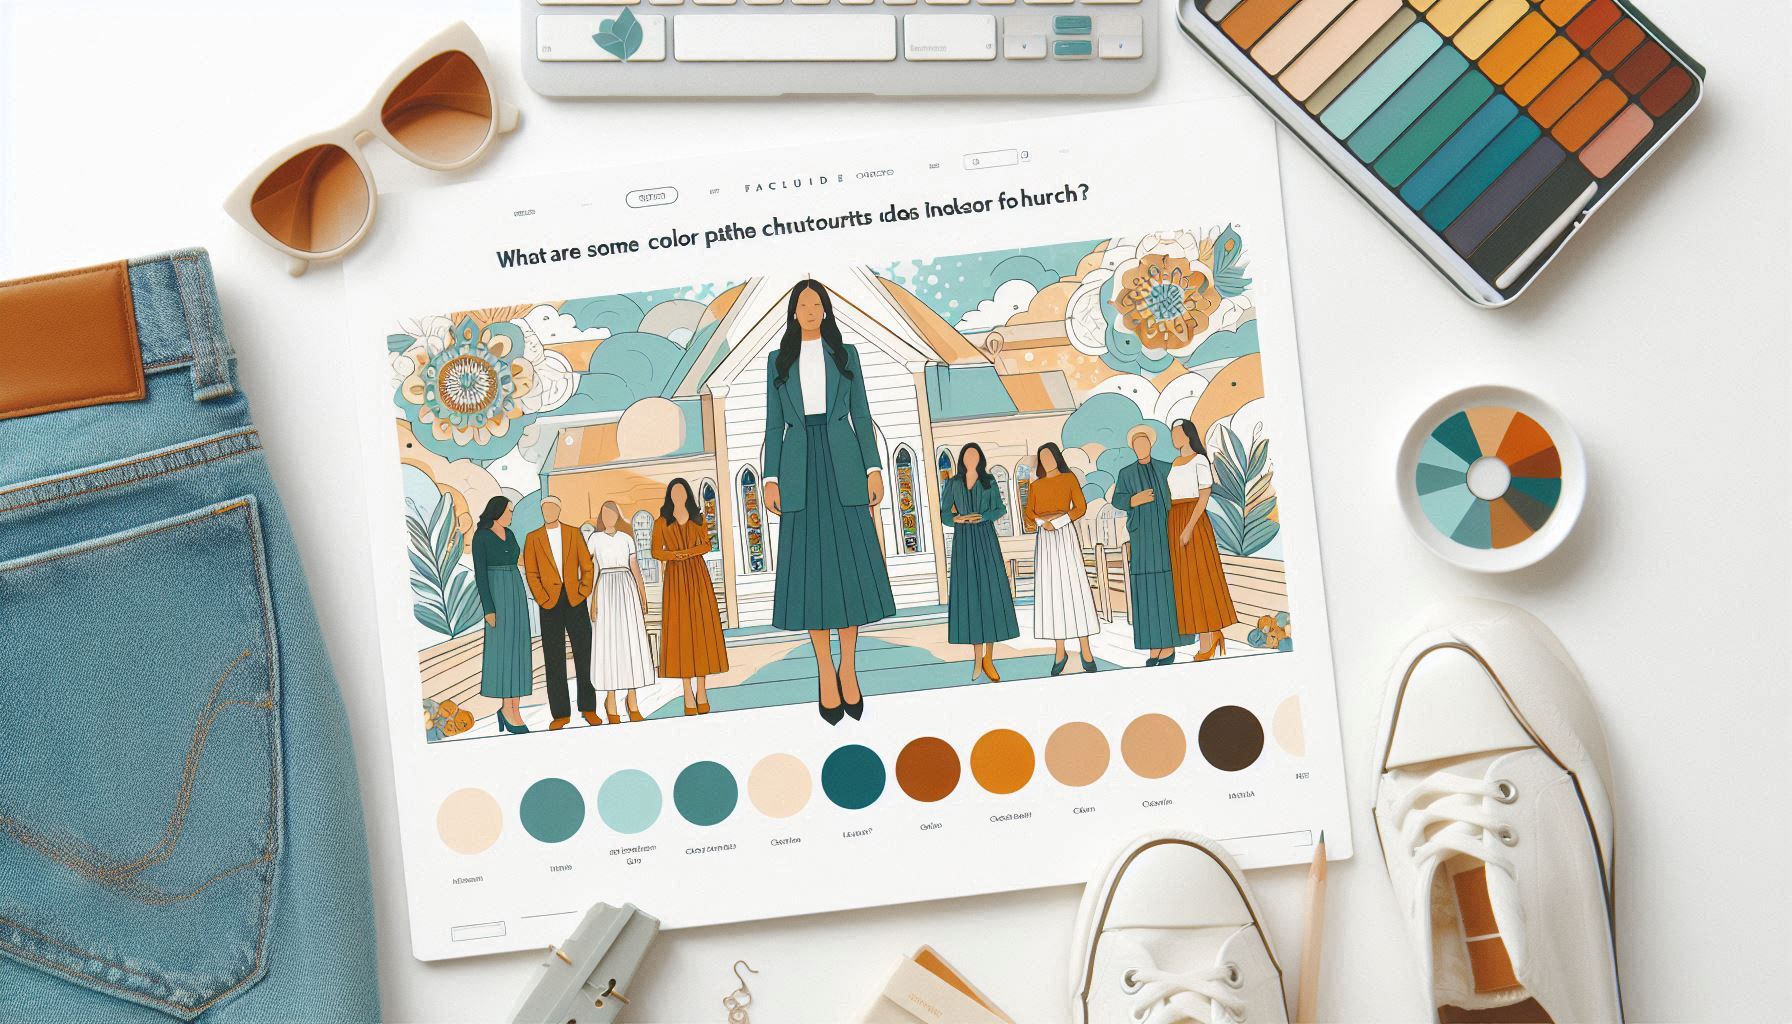 What Are Some Color Palettes Church Outfits Ideas That Work Well For Church?